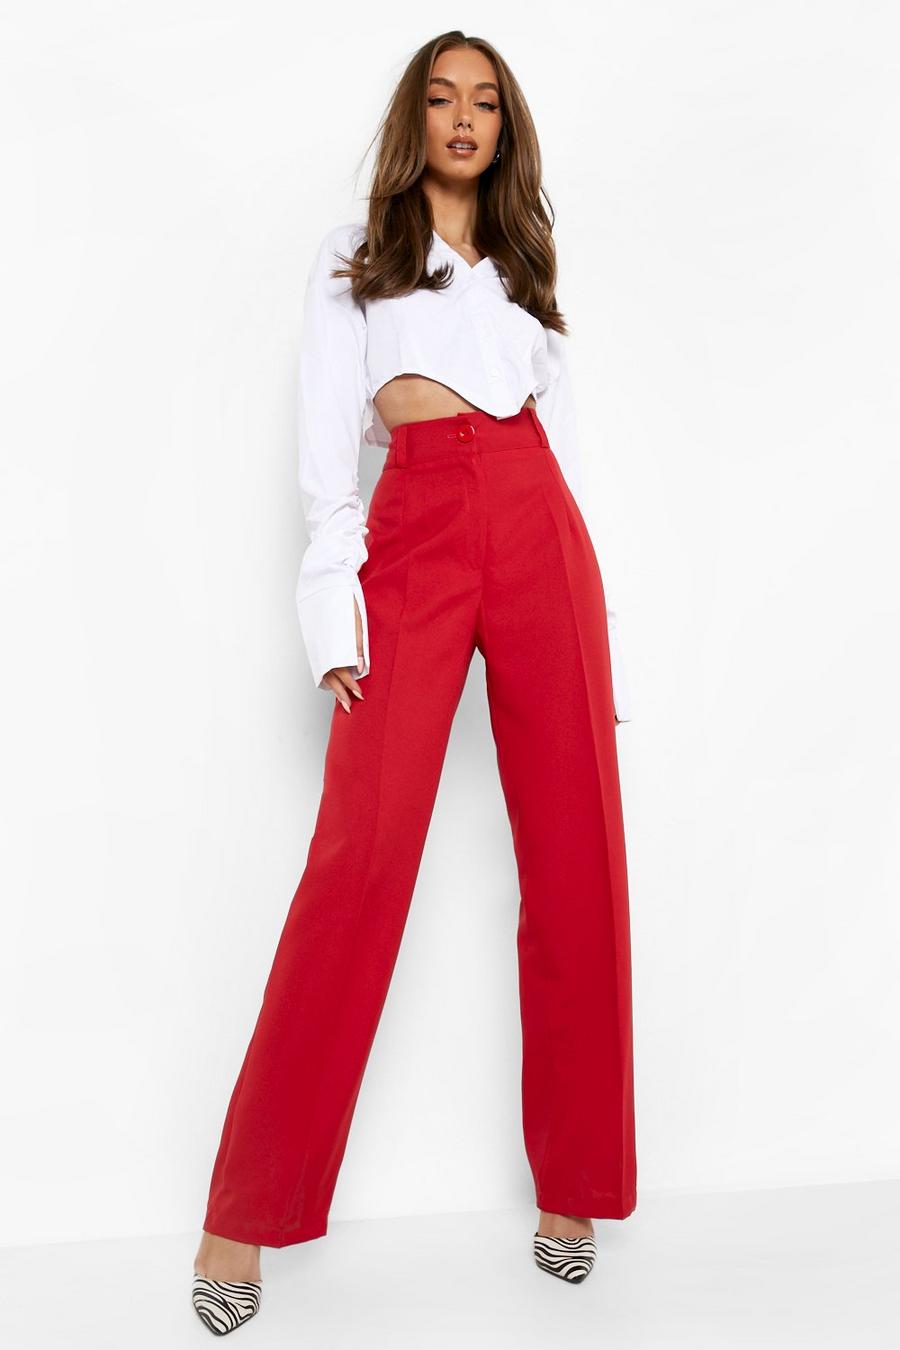 Women's Casual High Waisted Pleated Wide Leg Palazzo Pants Trousers